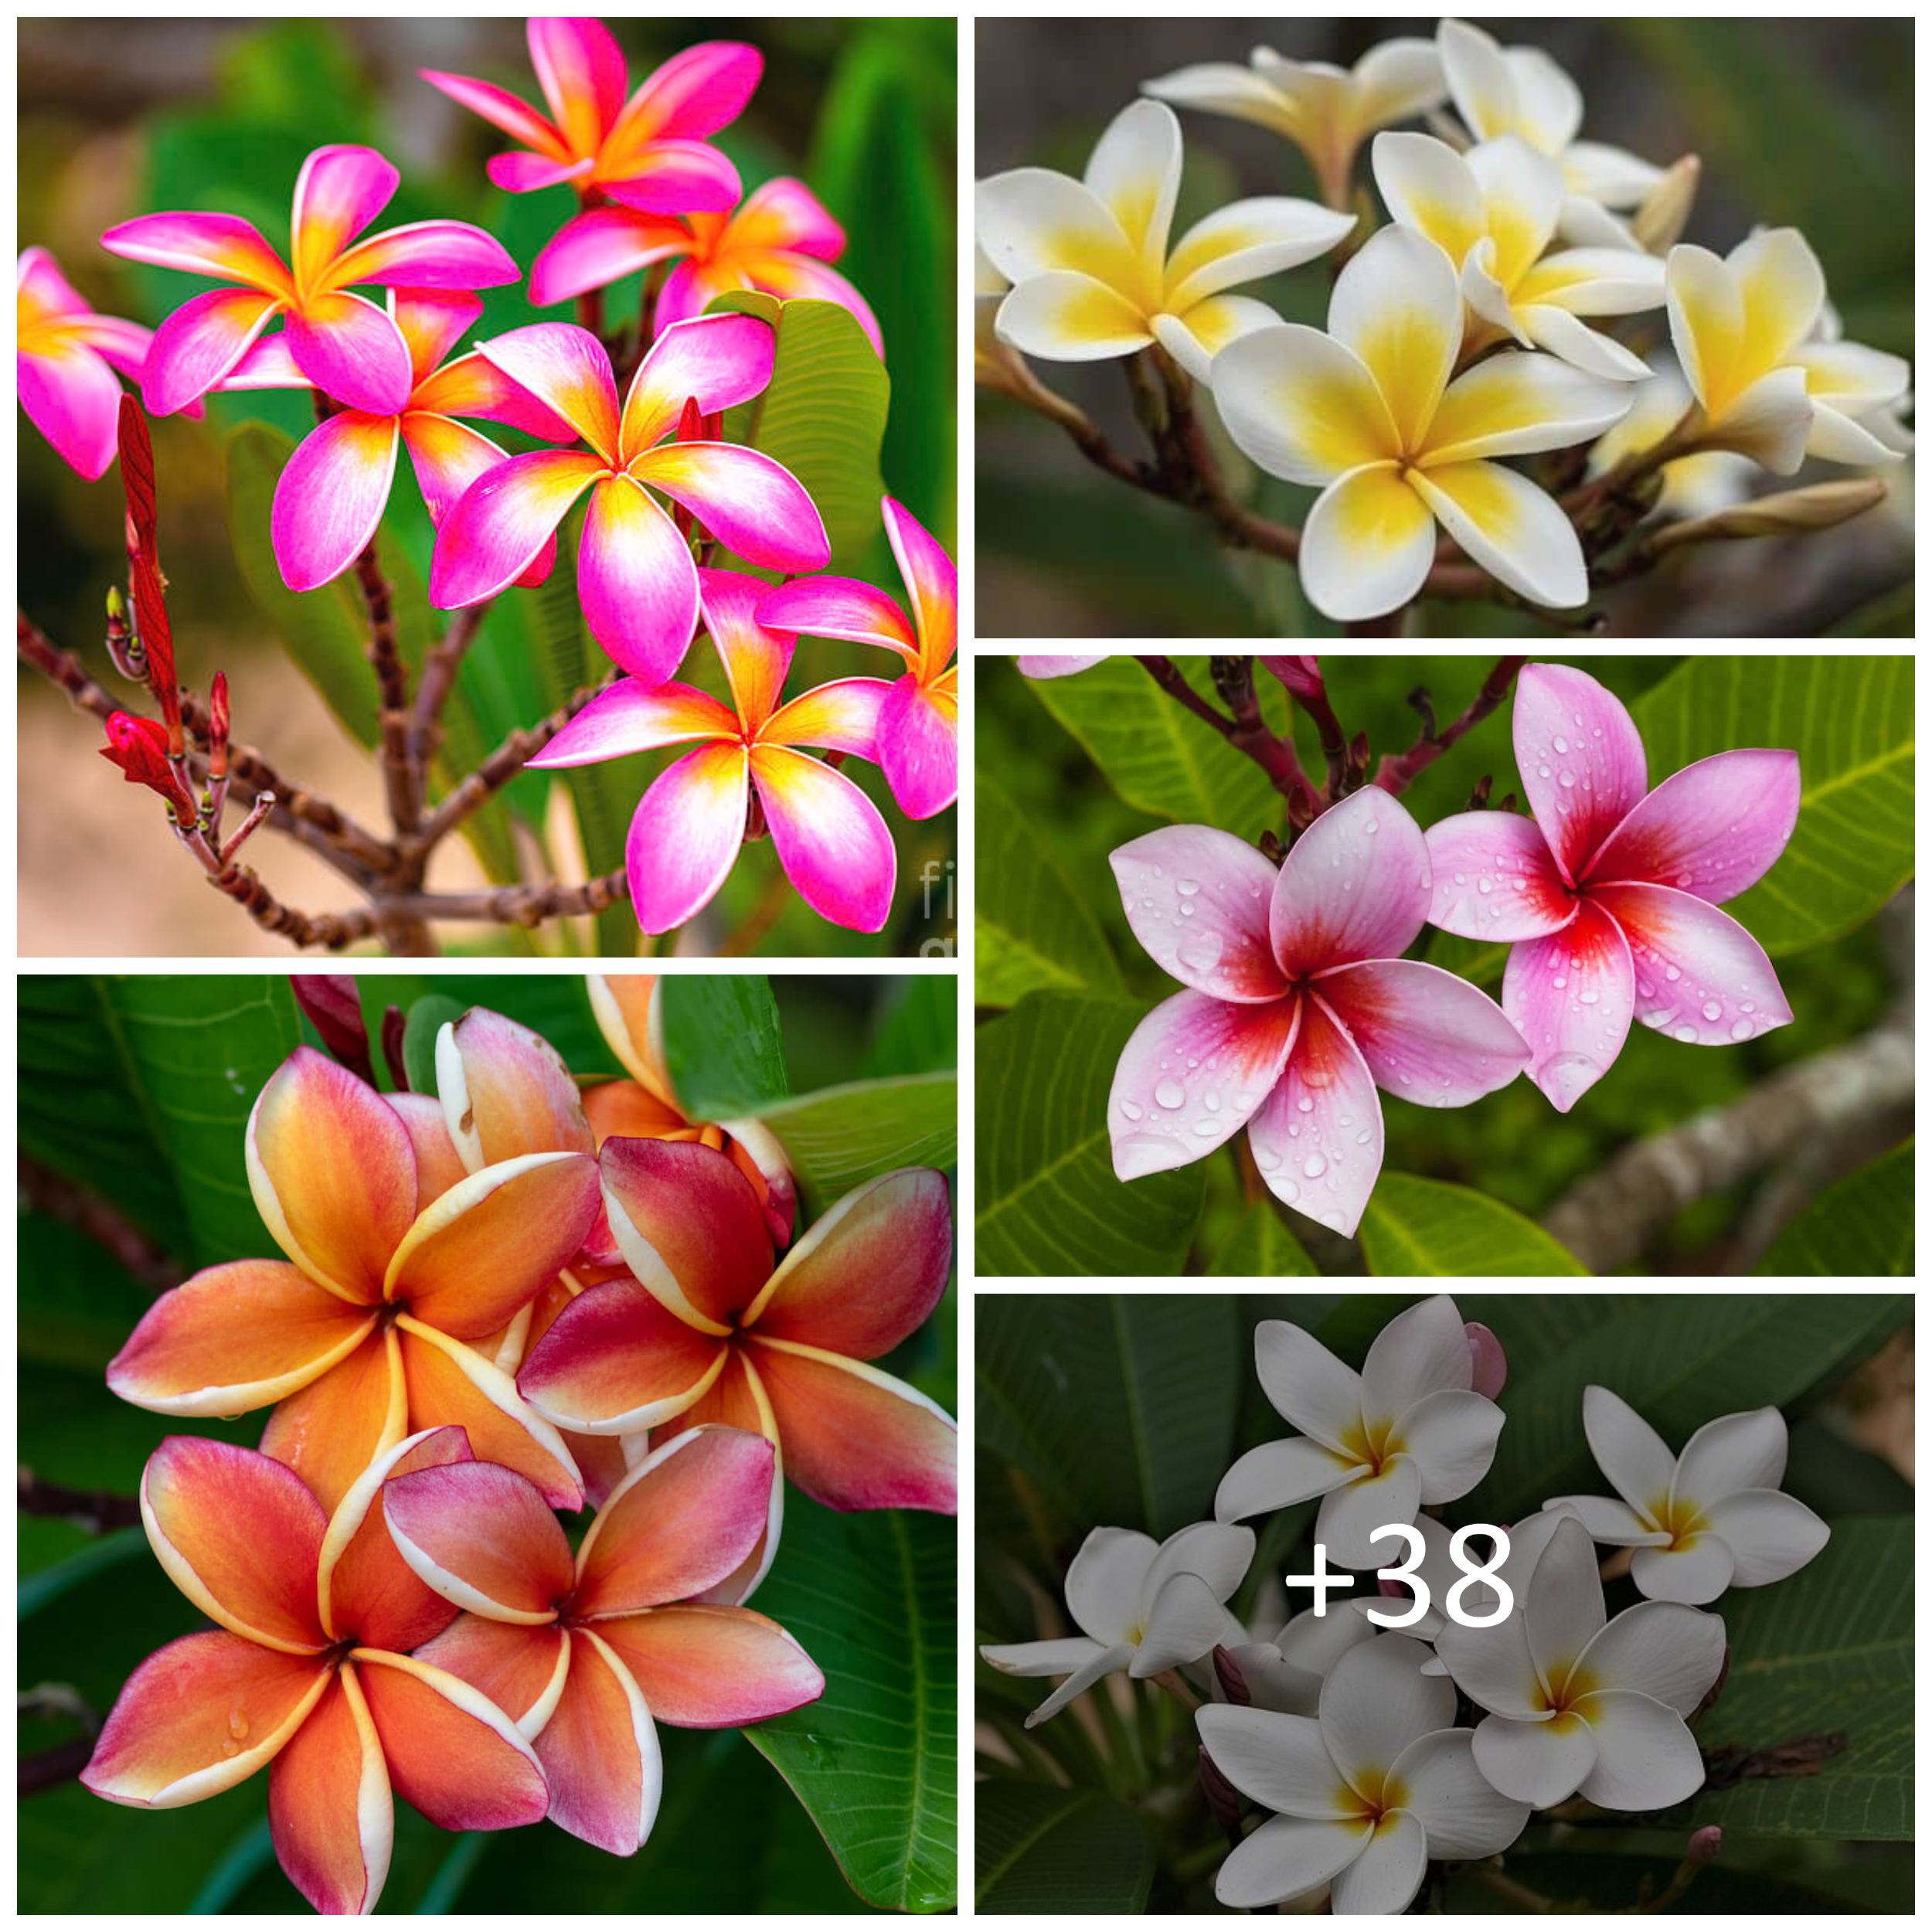 How to grow and care for frangipanis